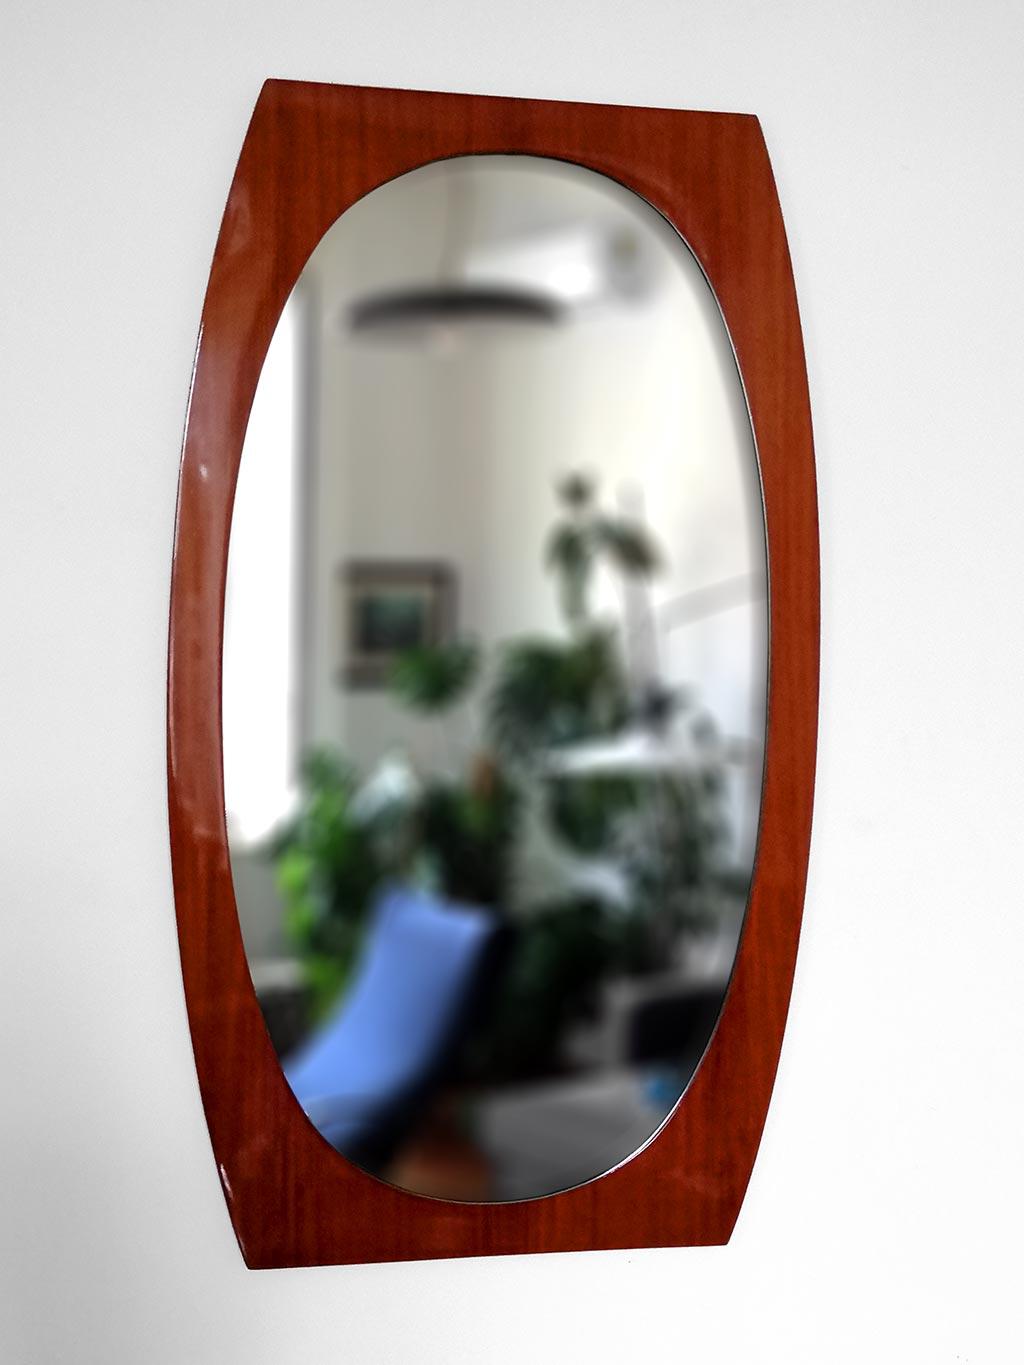 1960s Italian mirror. Polished solid teak frame. Detail of beveling visible in photo. Very good conditions. Natural signs of aging.